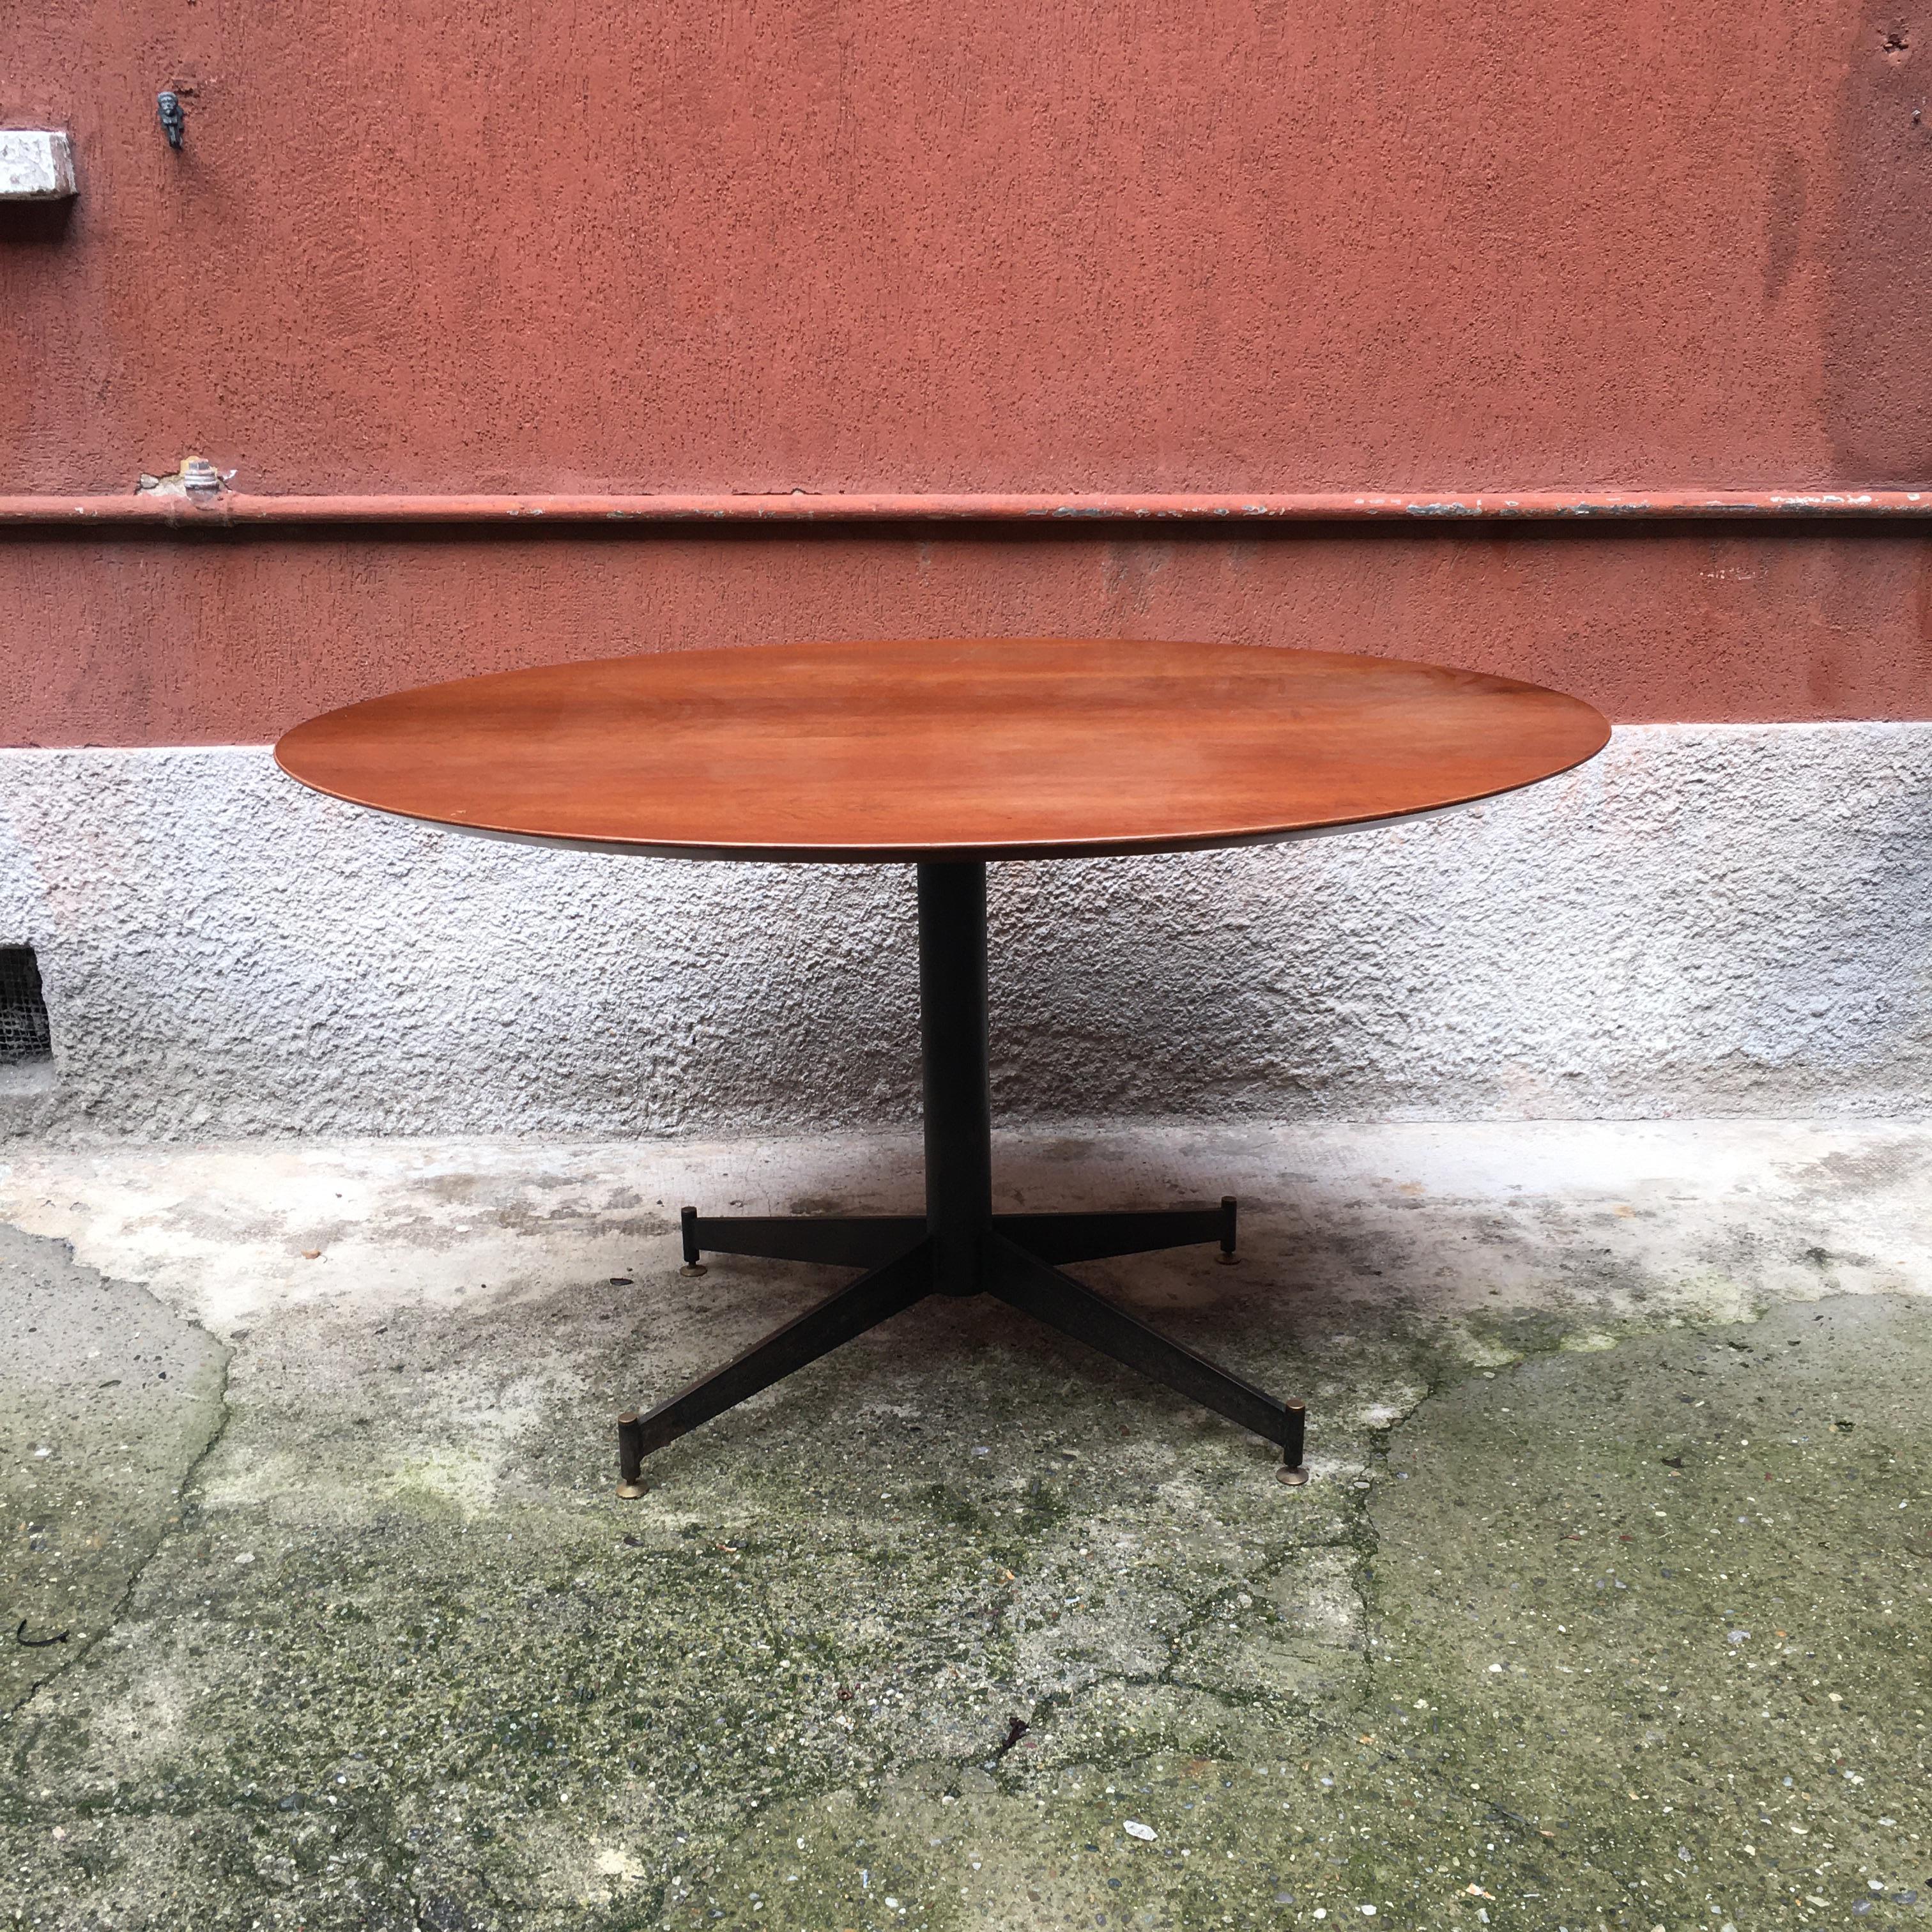 Italian elliptical teak and metal dining table, 1950s
Dining table with elliptical teak top and black metal frame with brass details and tips.